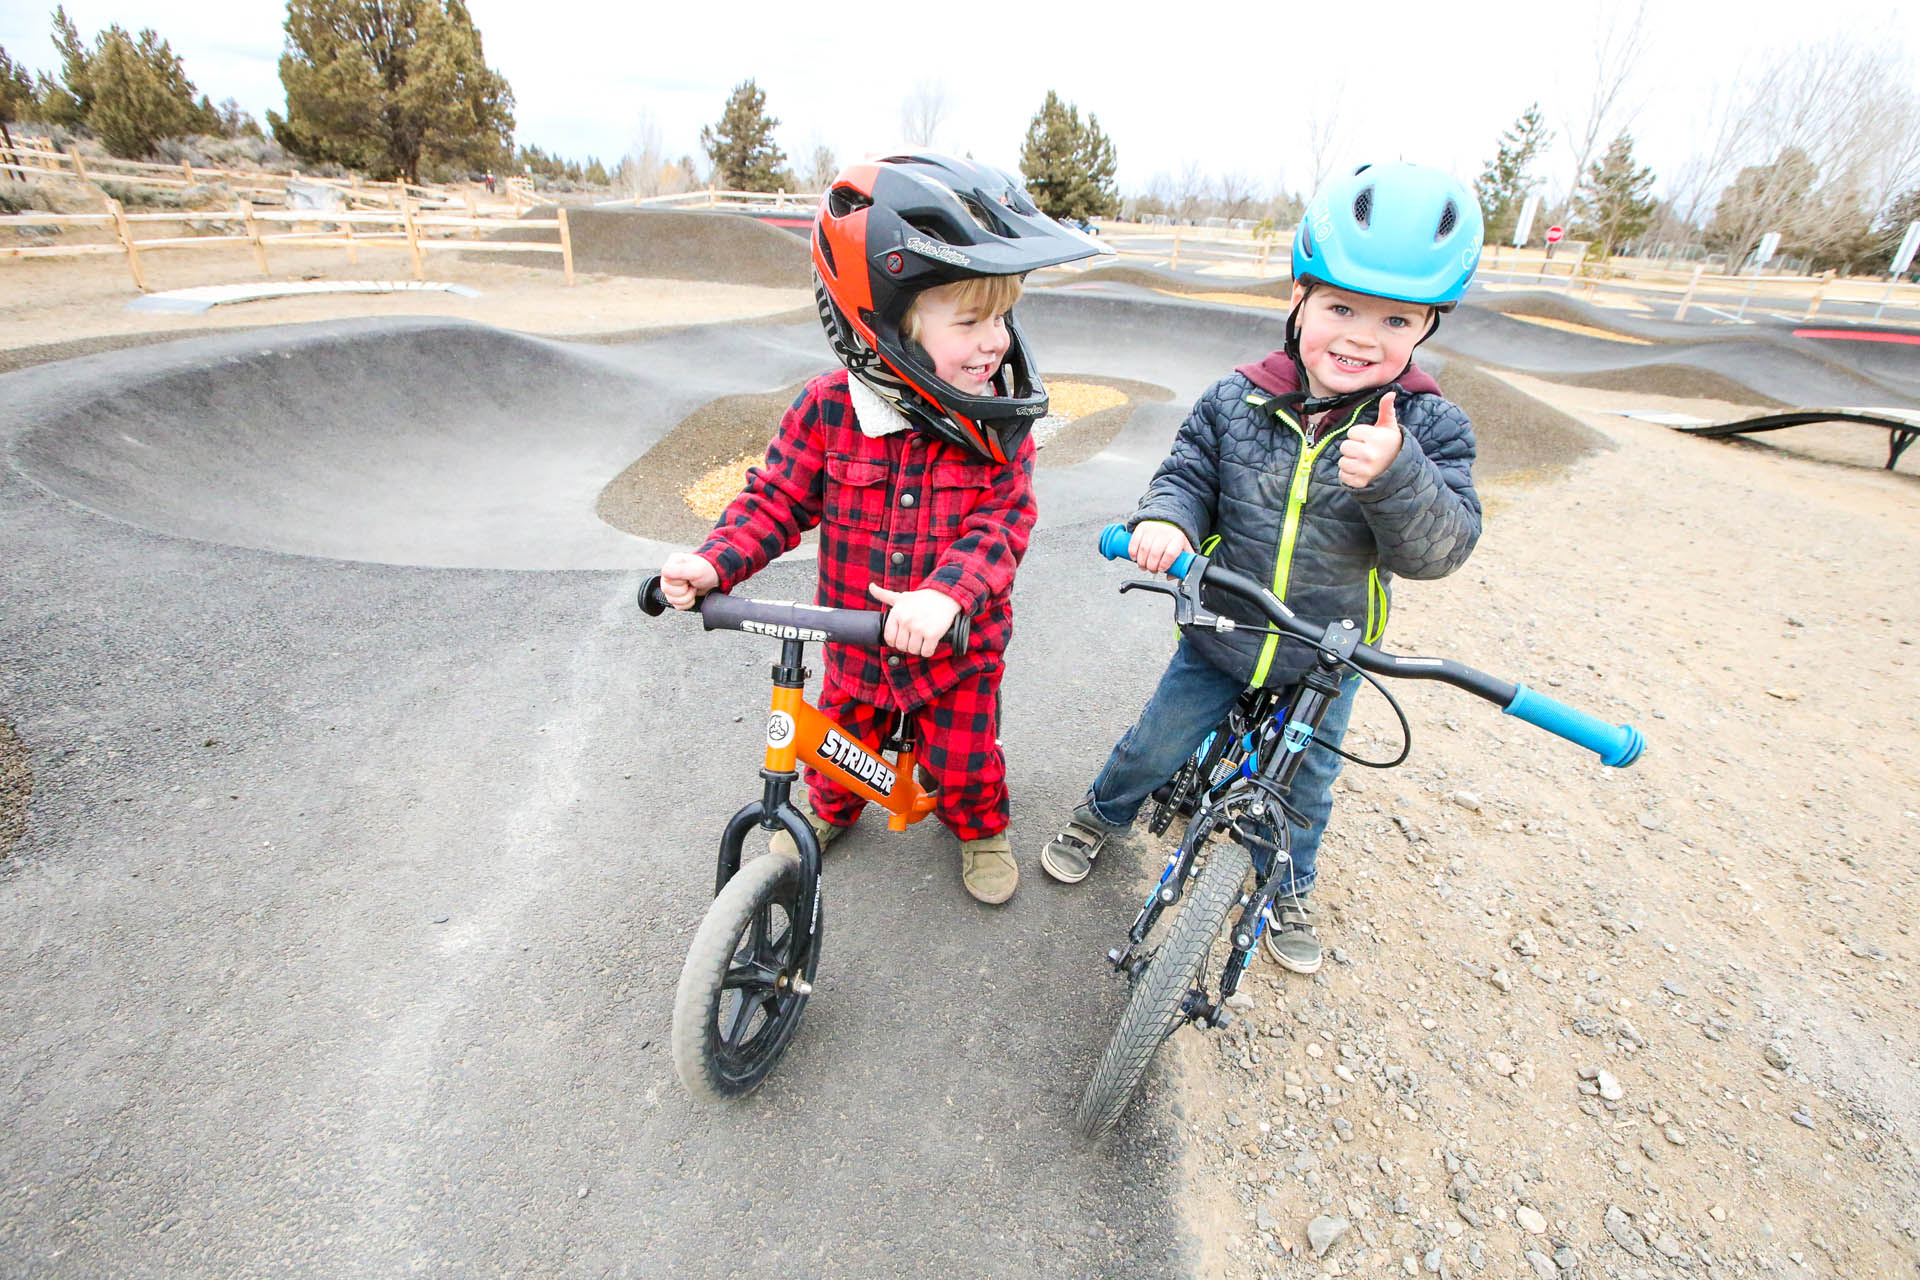 two young children on bikes pose in front of pump track, one is giving a thumbs up